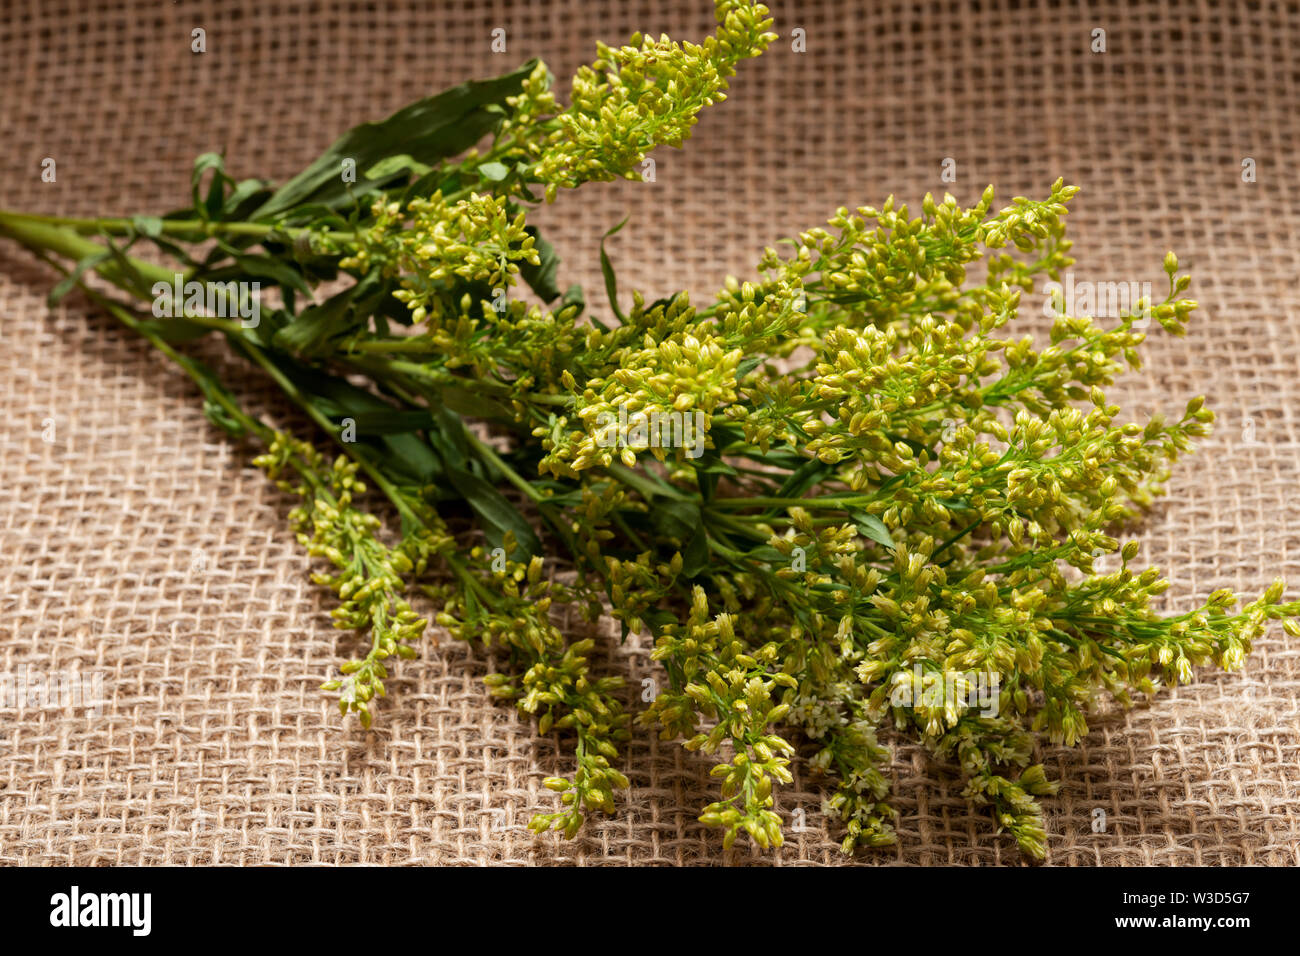 Stems of Fresh Yellow Asters Solidago Flowers (commonly called Goldenrods) on natural burlap background. Genus: Solidago in Asteraceae family. Stock Photo